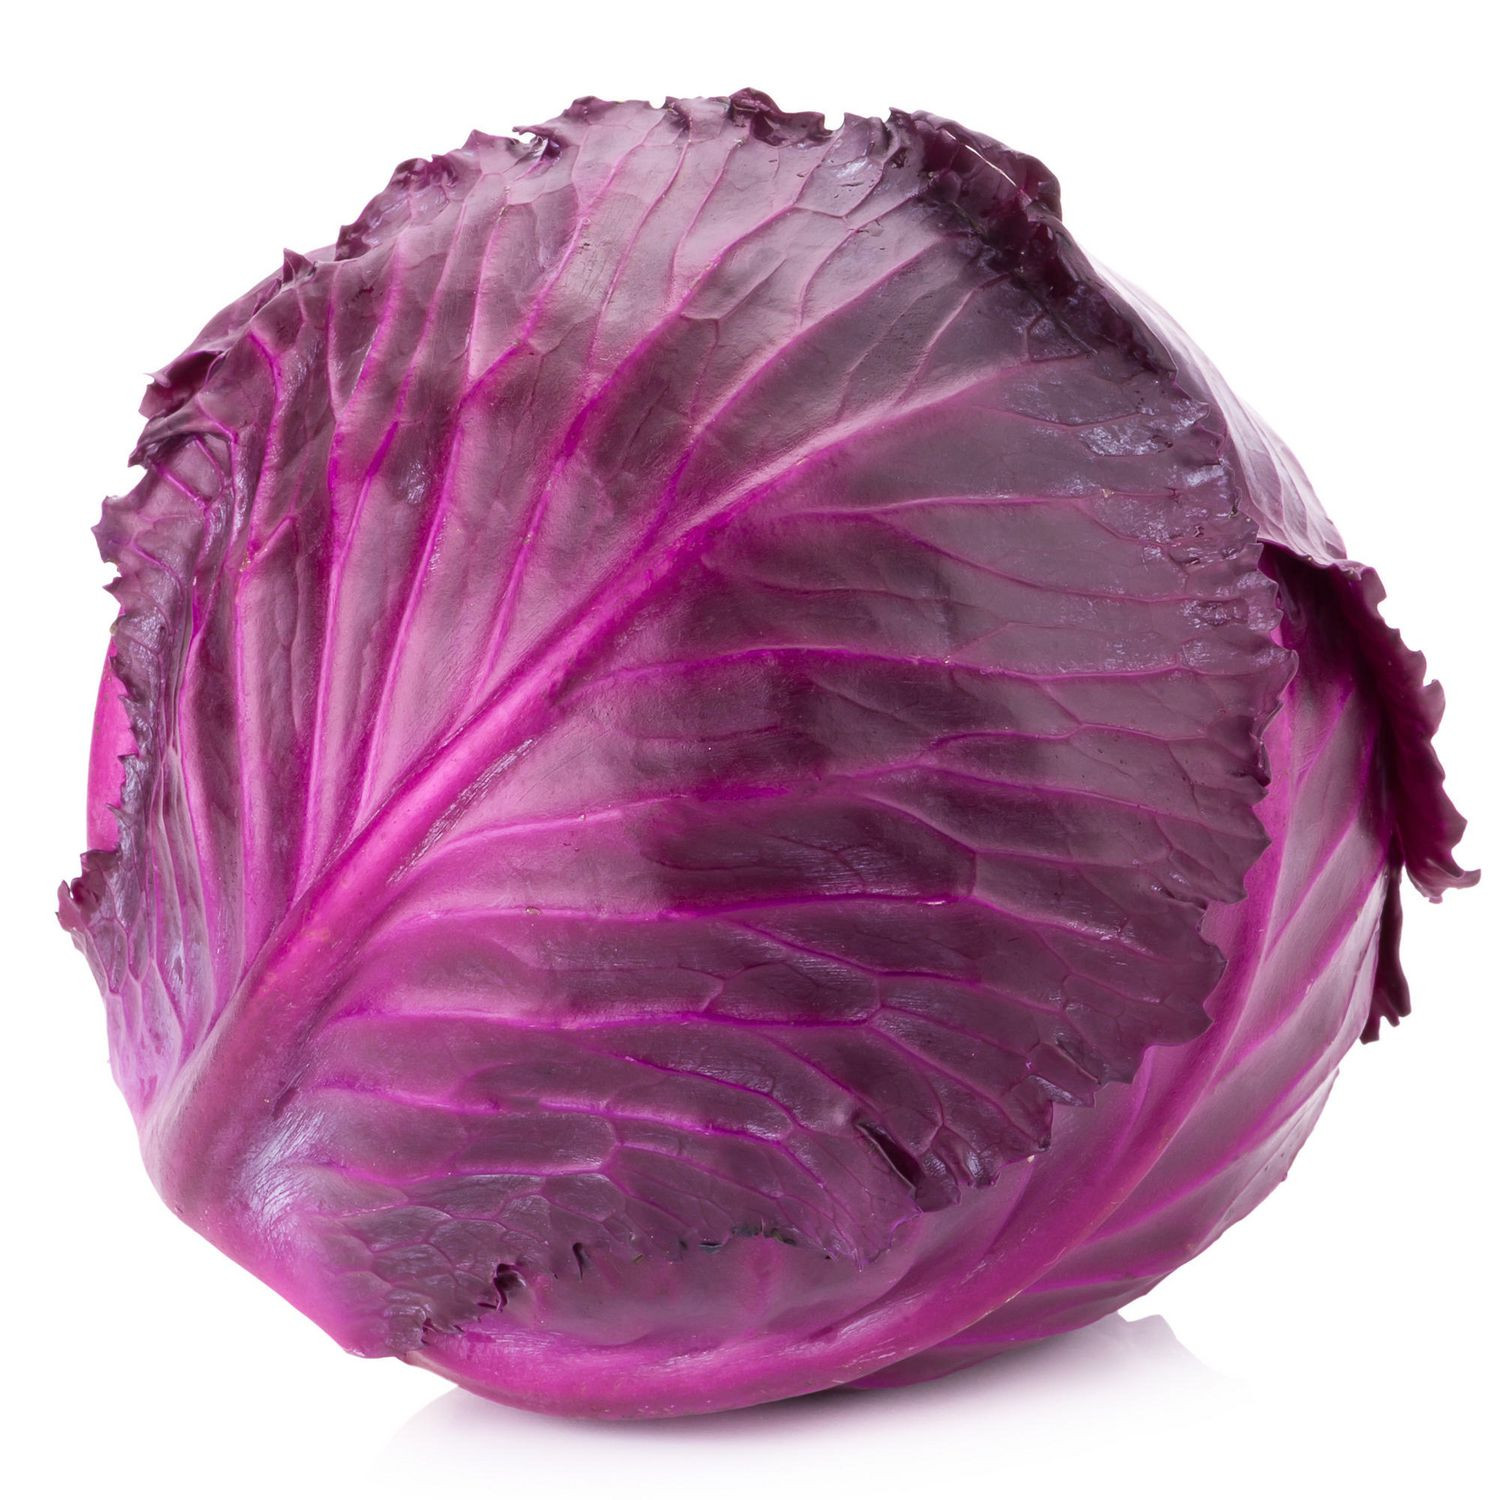 Cabbage Whole Red